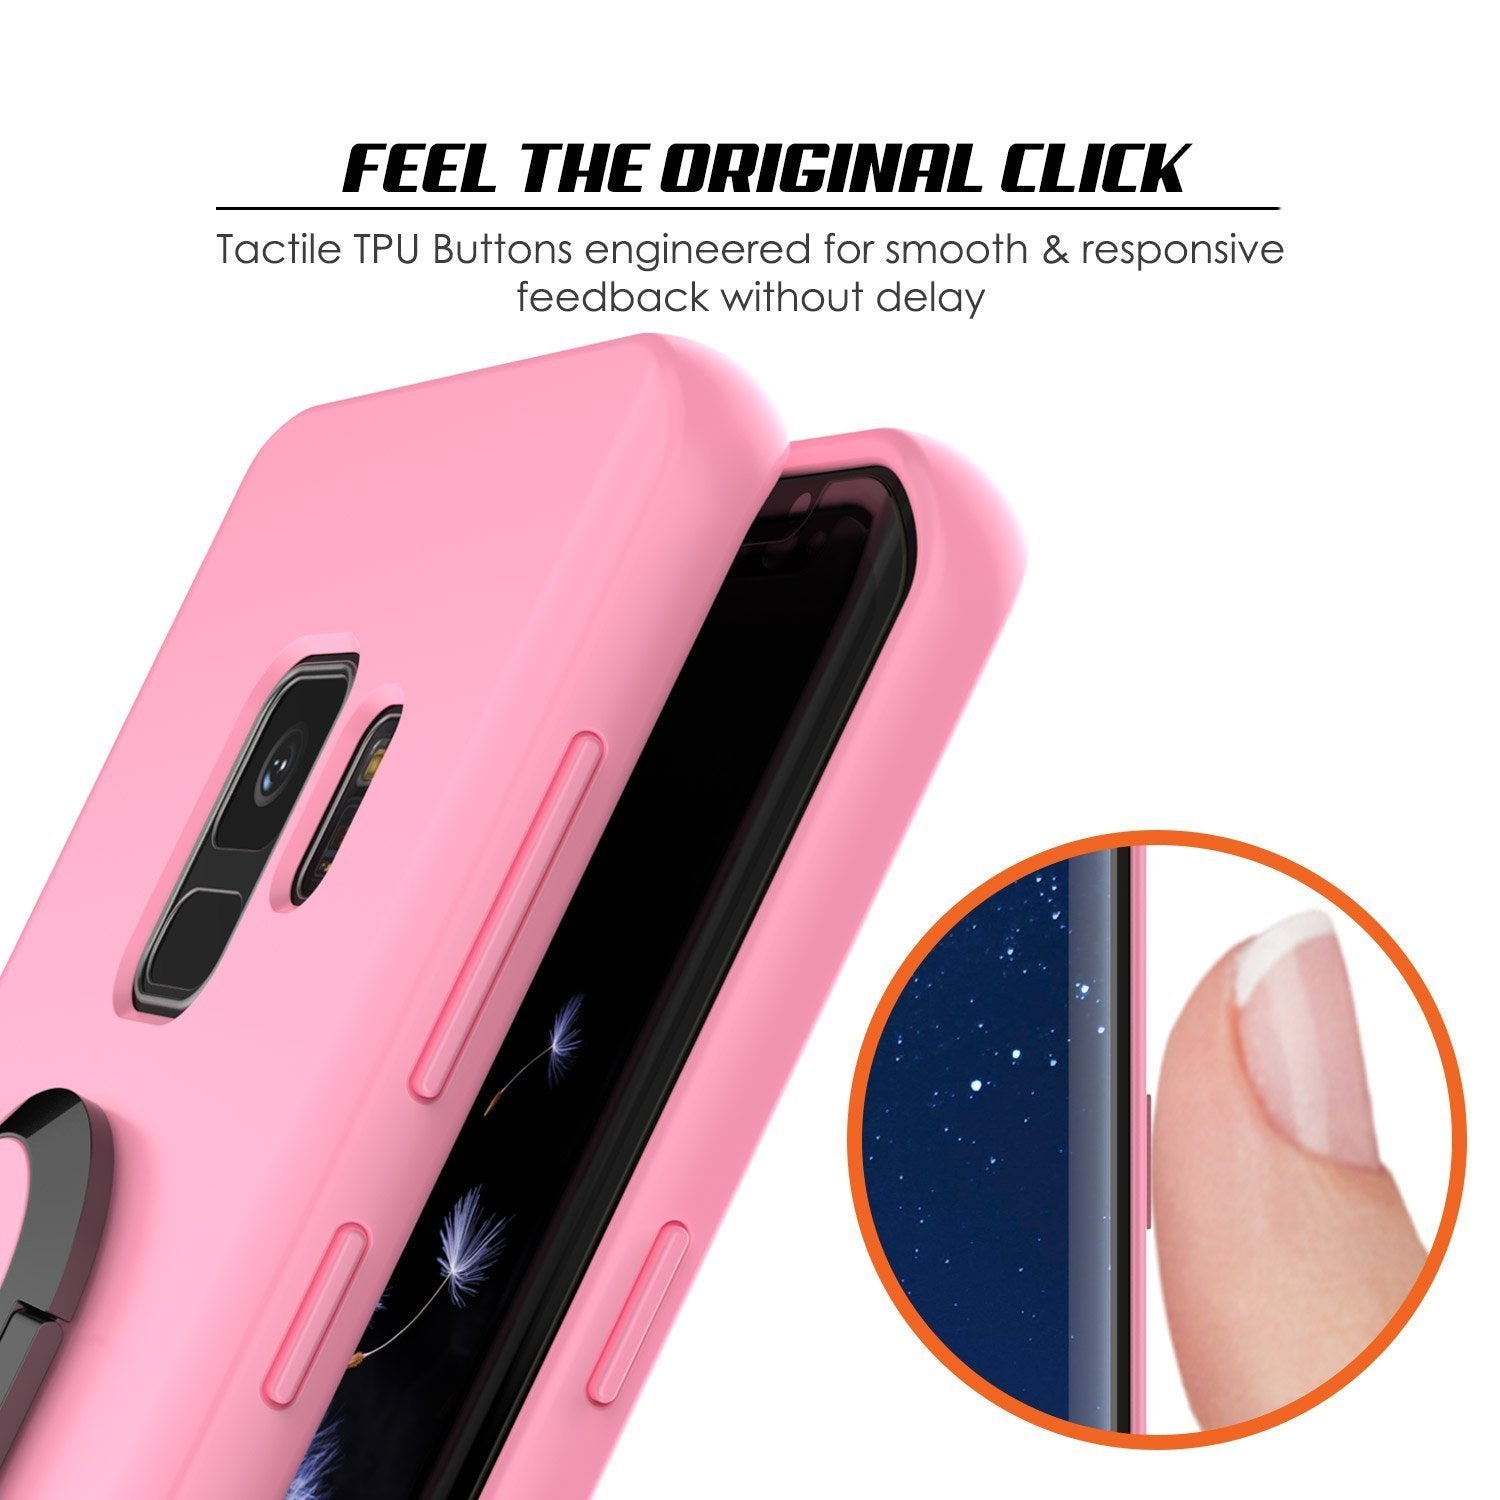 Galaxy S9 Case, Punkcase Magnetix Protective TPU Cover W/ Kickstand, Ring Grip Holder & Metal Plate for Magnetic Car Phone Mount PLUS PunkShield Screen Protector for Samsung S9 Edge [Pink]